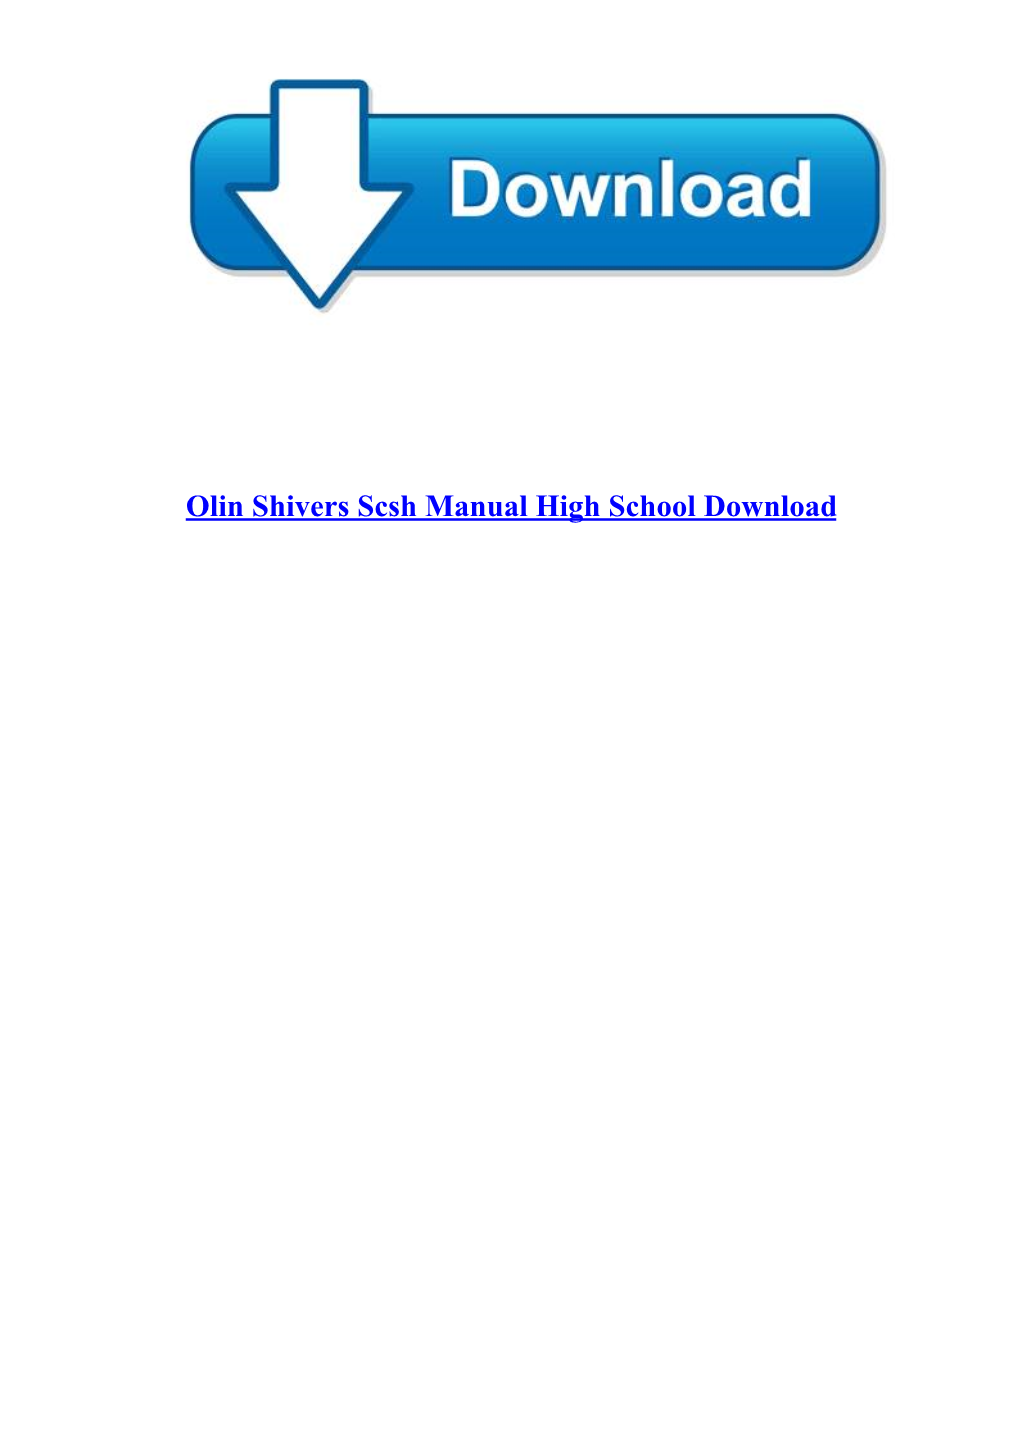 [Special-PDF] Olin Shivers Scsh Manual High School